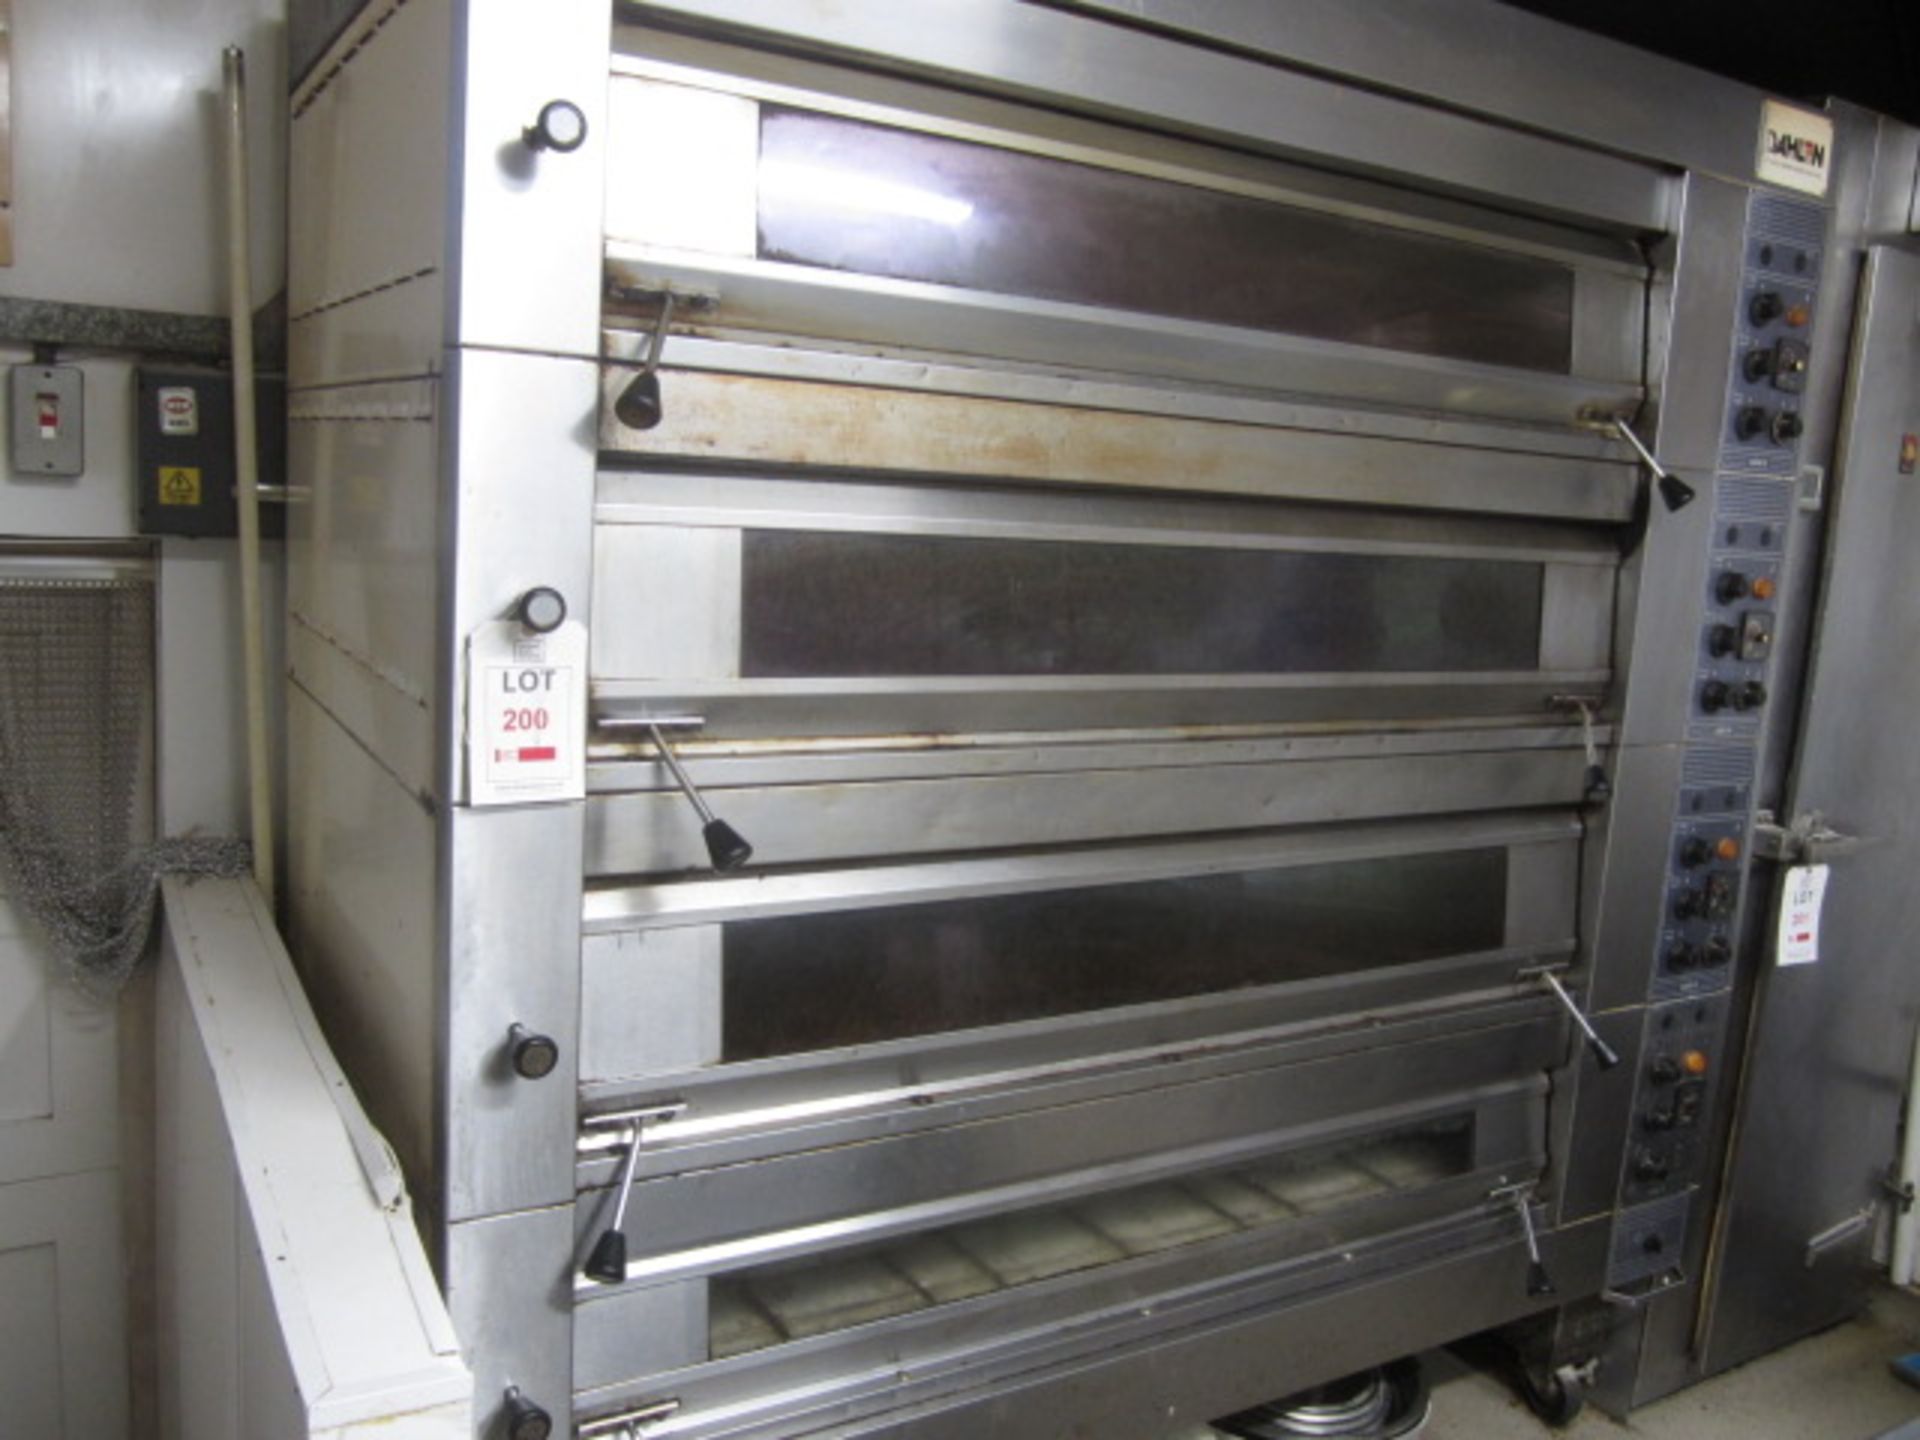 Dahlen stainless steel commercial 4 deck oven, 56" deck width, approx. overall size: 1950mm x 2010mm - Image 2 of 7